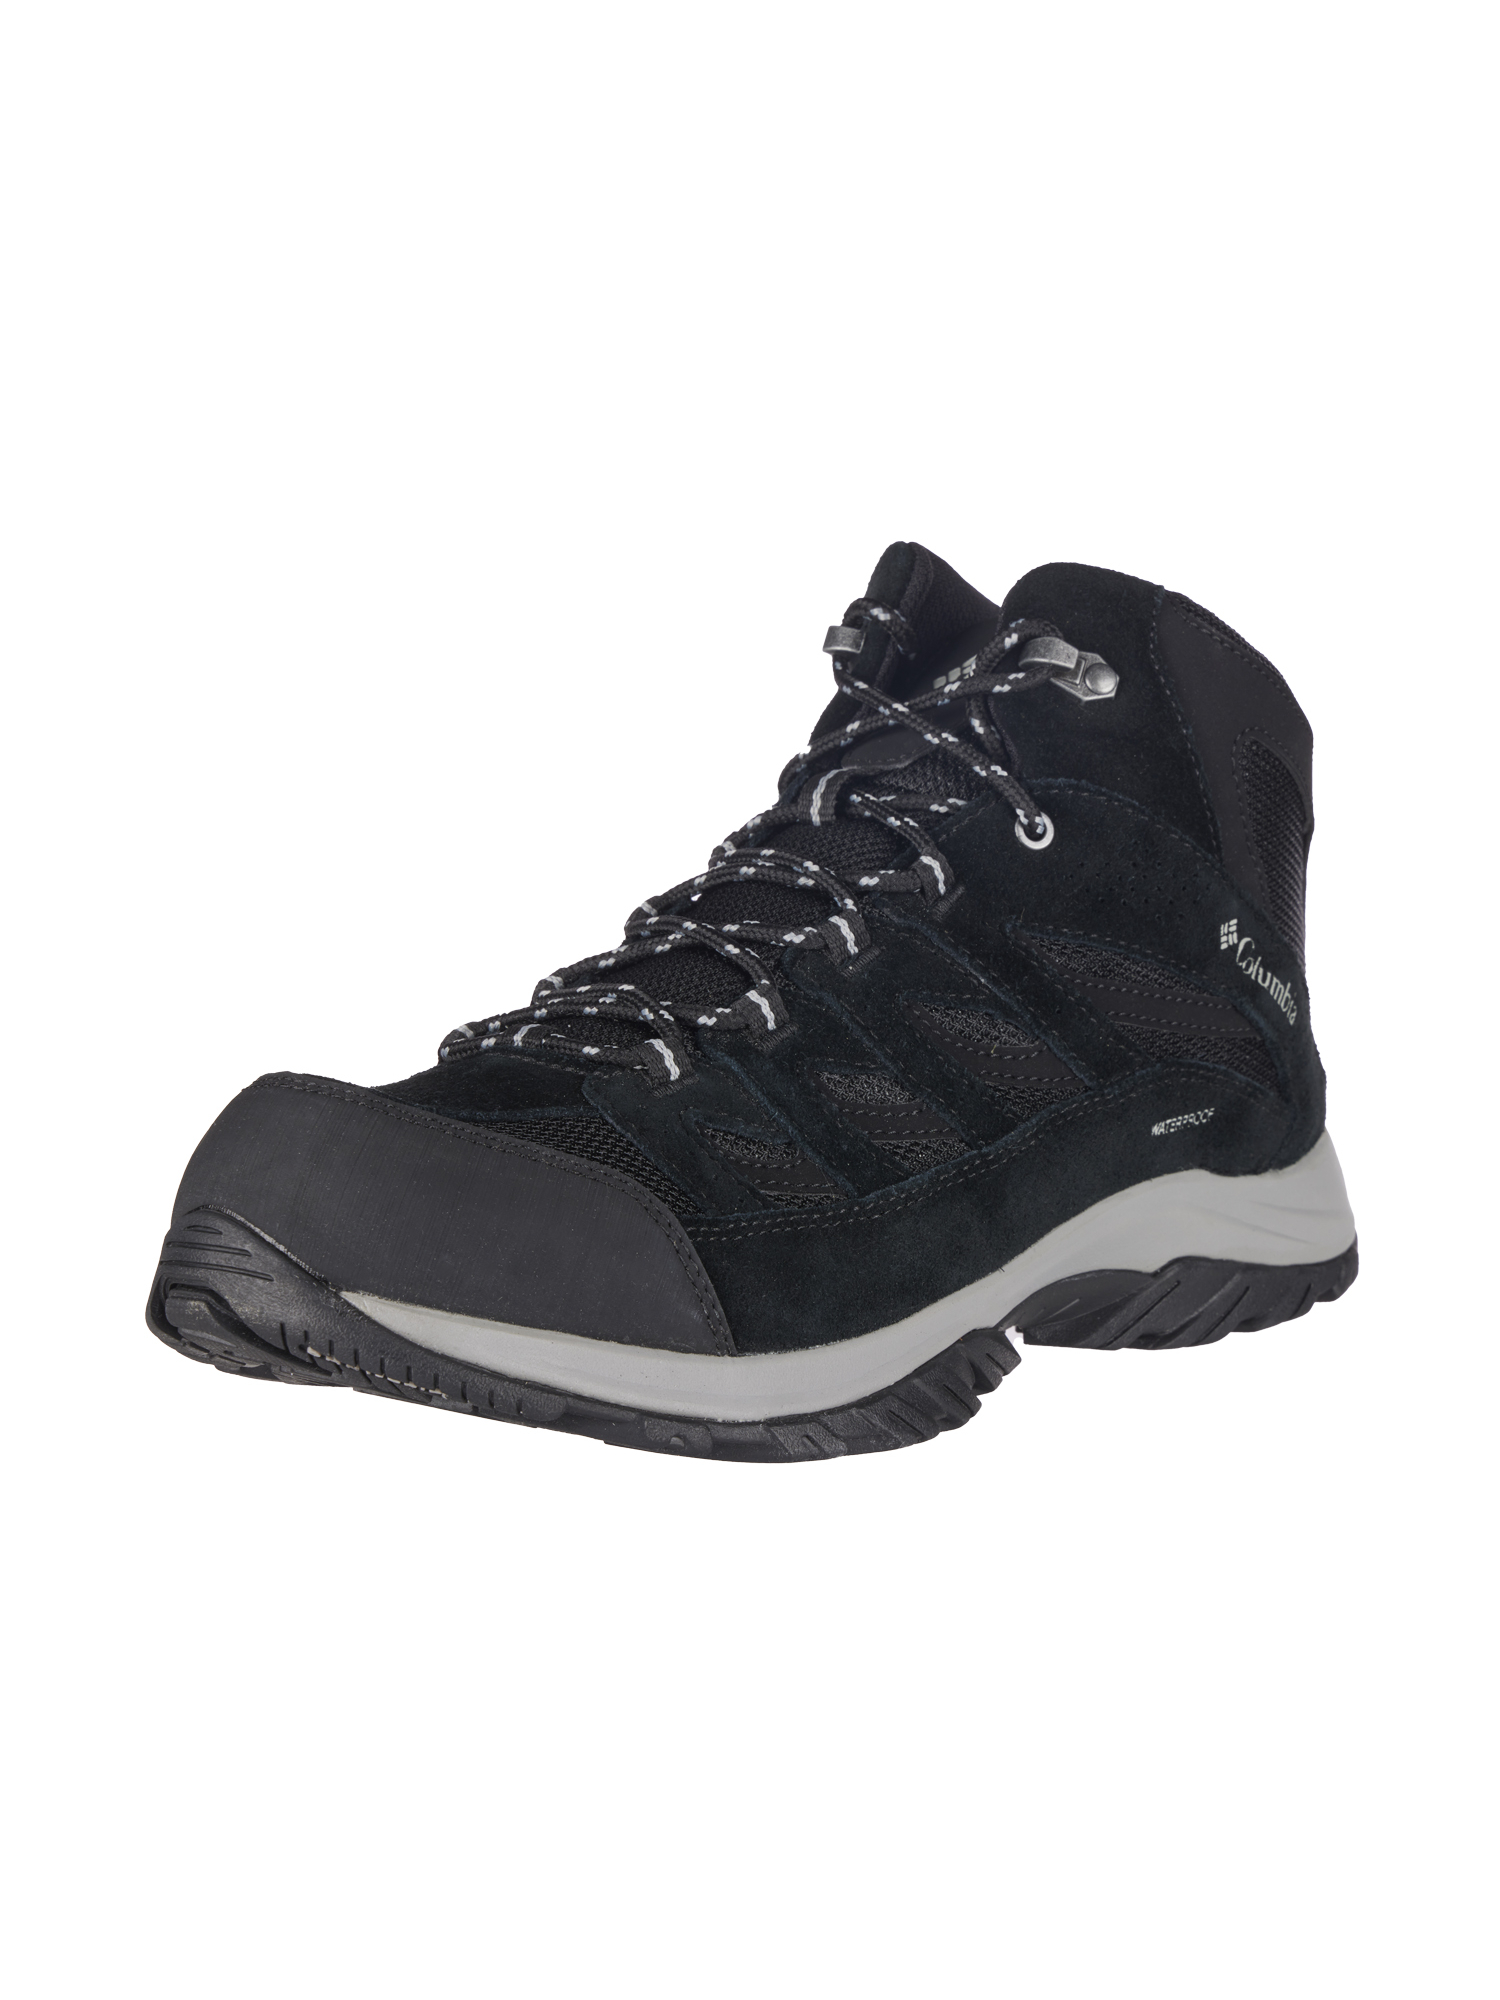 Columbia Crestwood Mid Waterproof Men's Hiking and Outdoor Boots